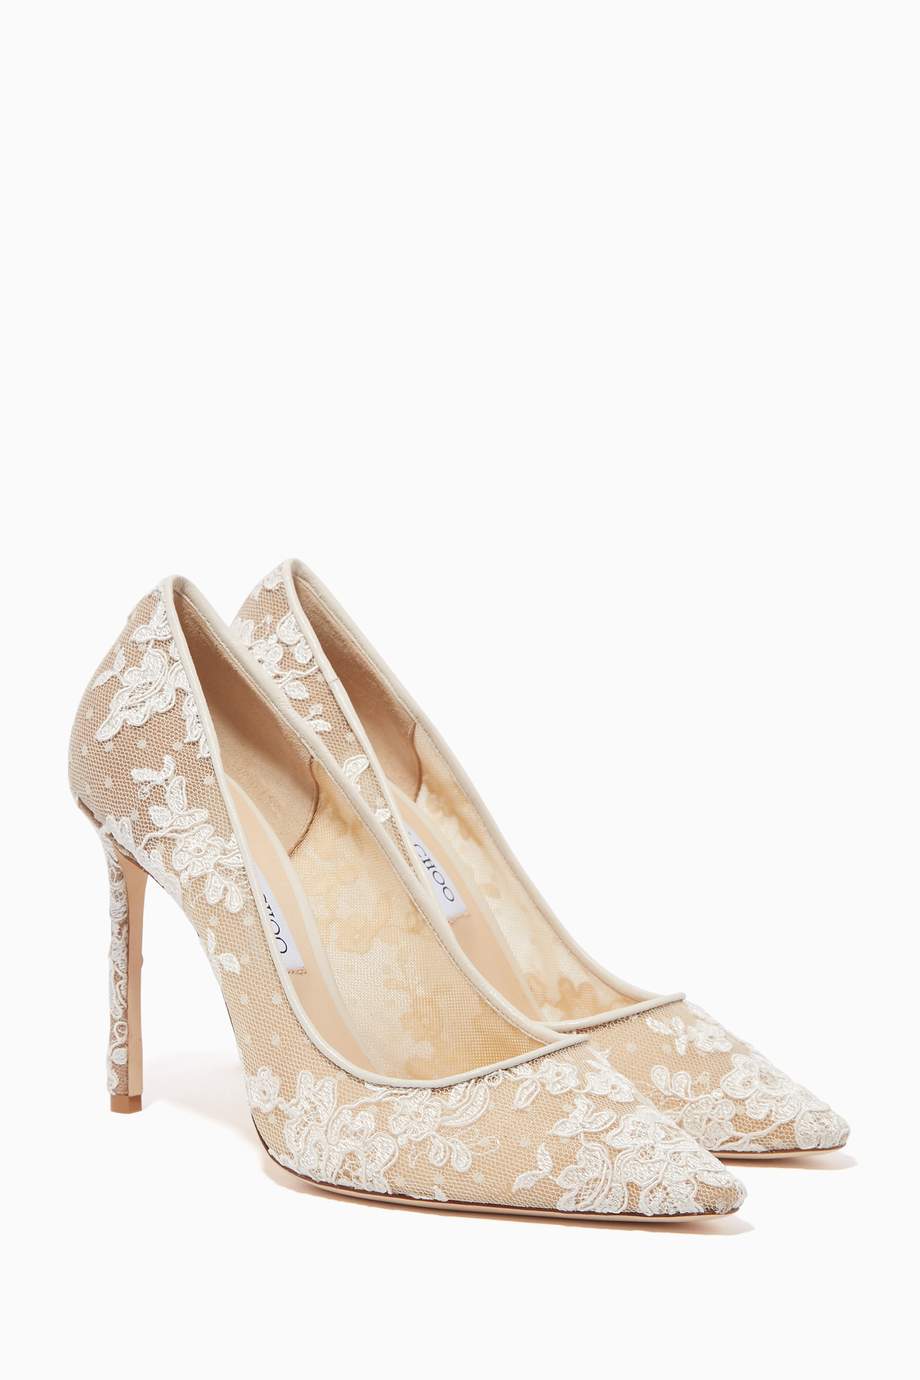 Shop Jimmy Choo White Romy 100 Floral Lace Pumps for Women | Ounass Saudi